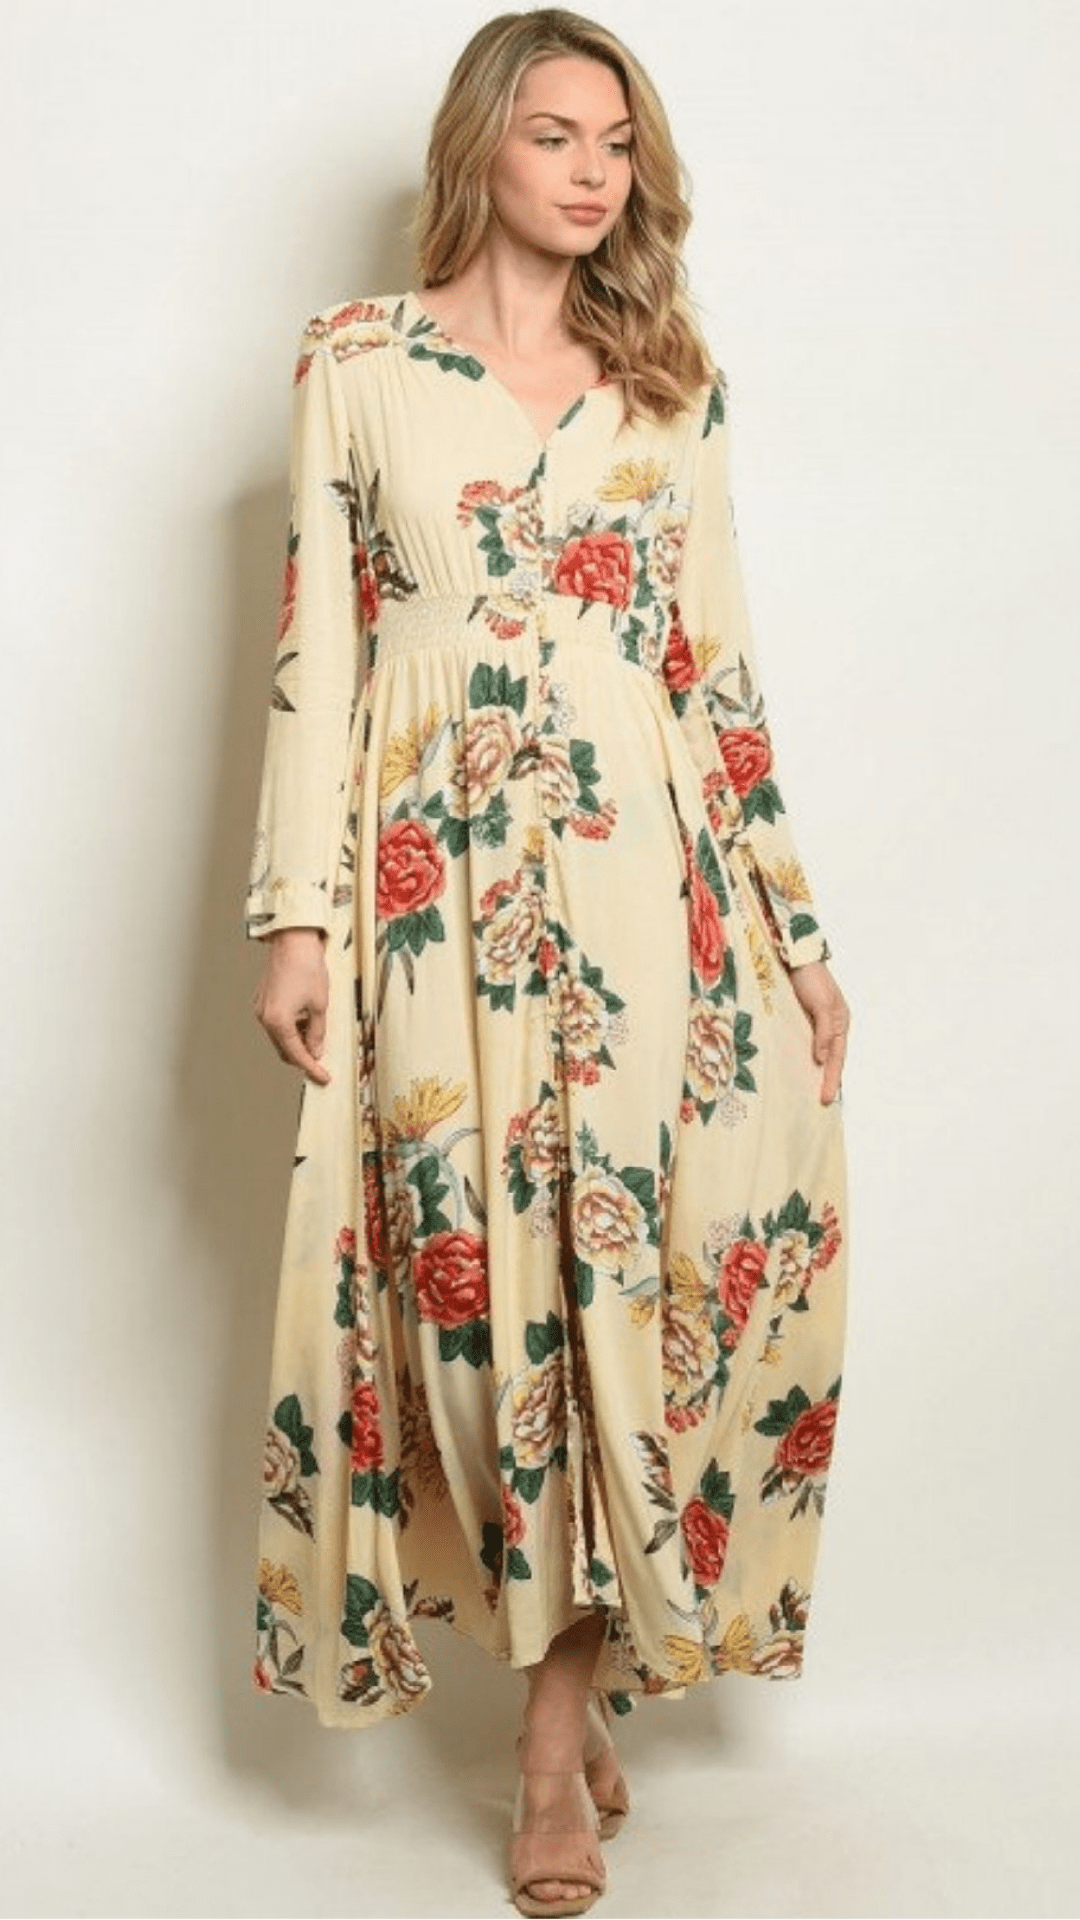 Mid-size Fit and Flare Floral Dress